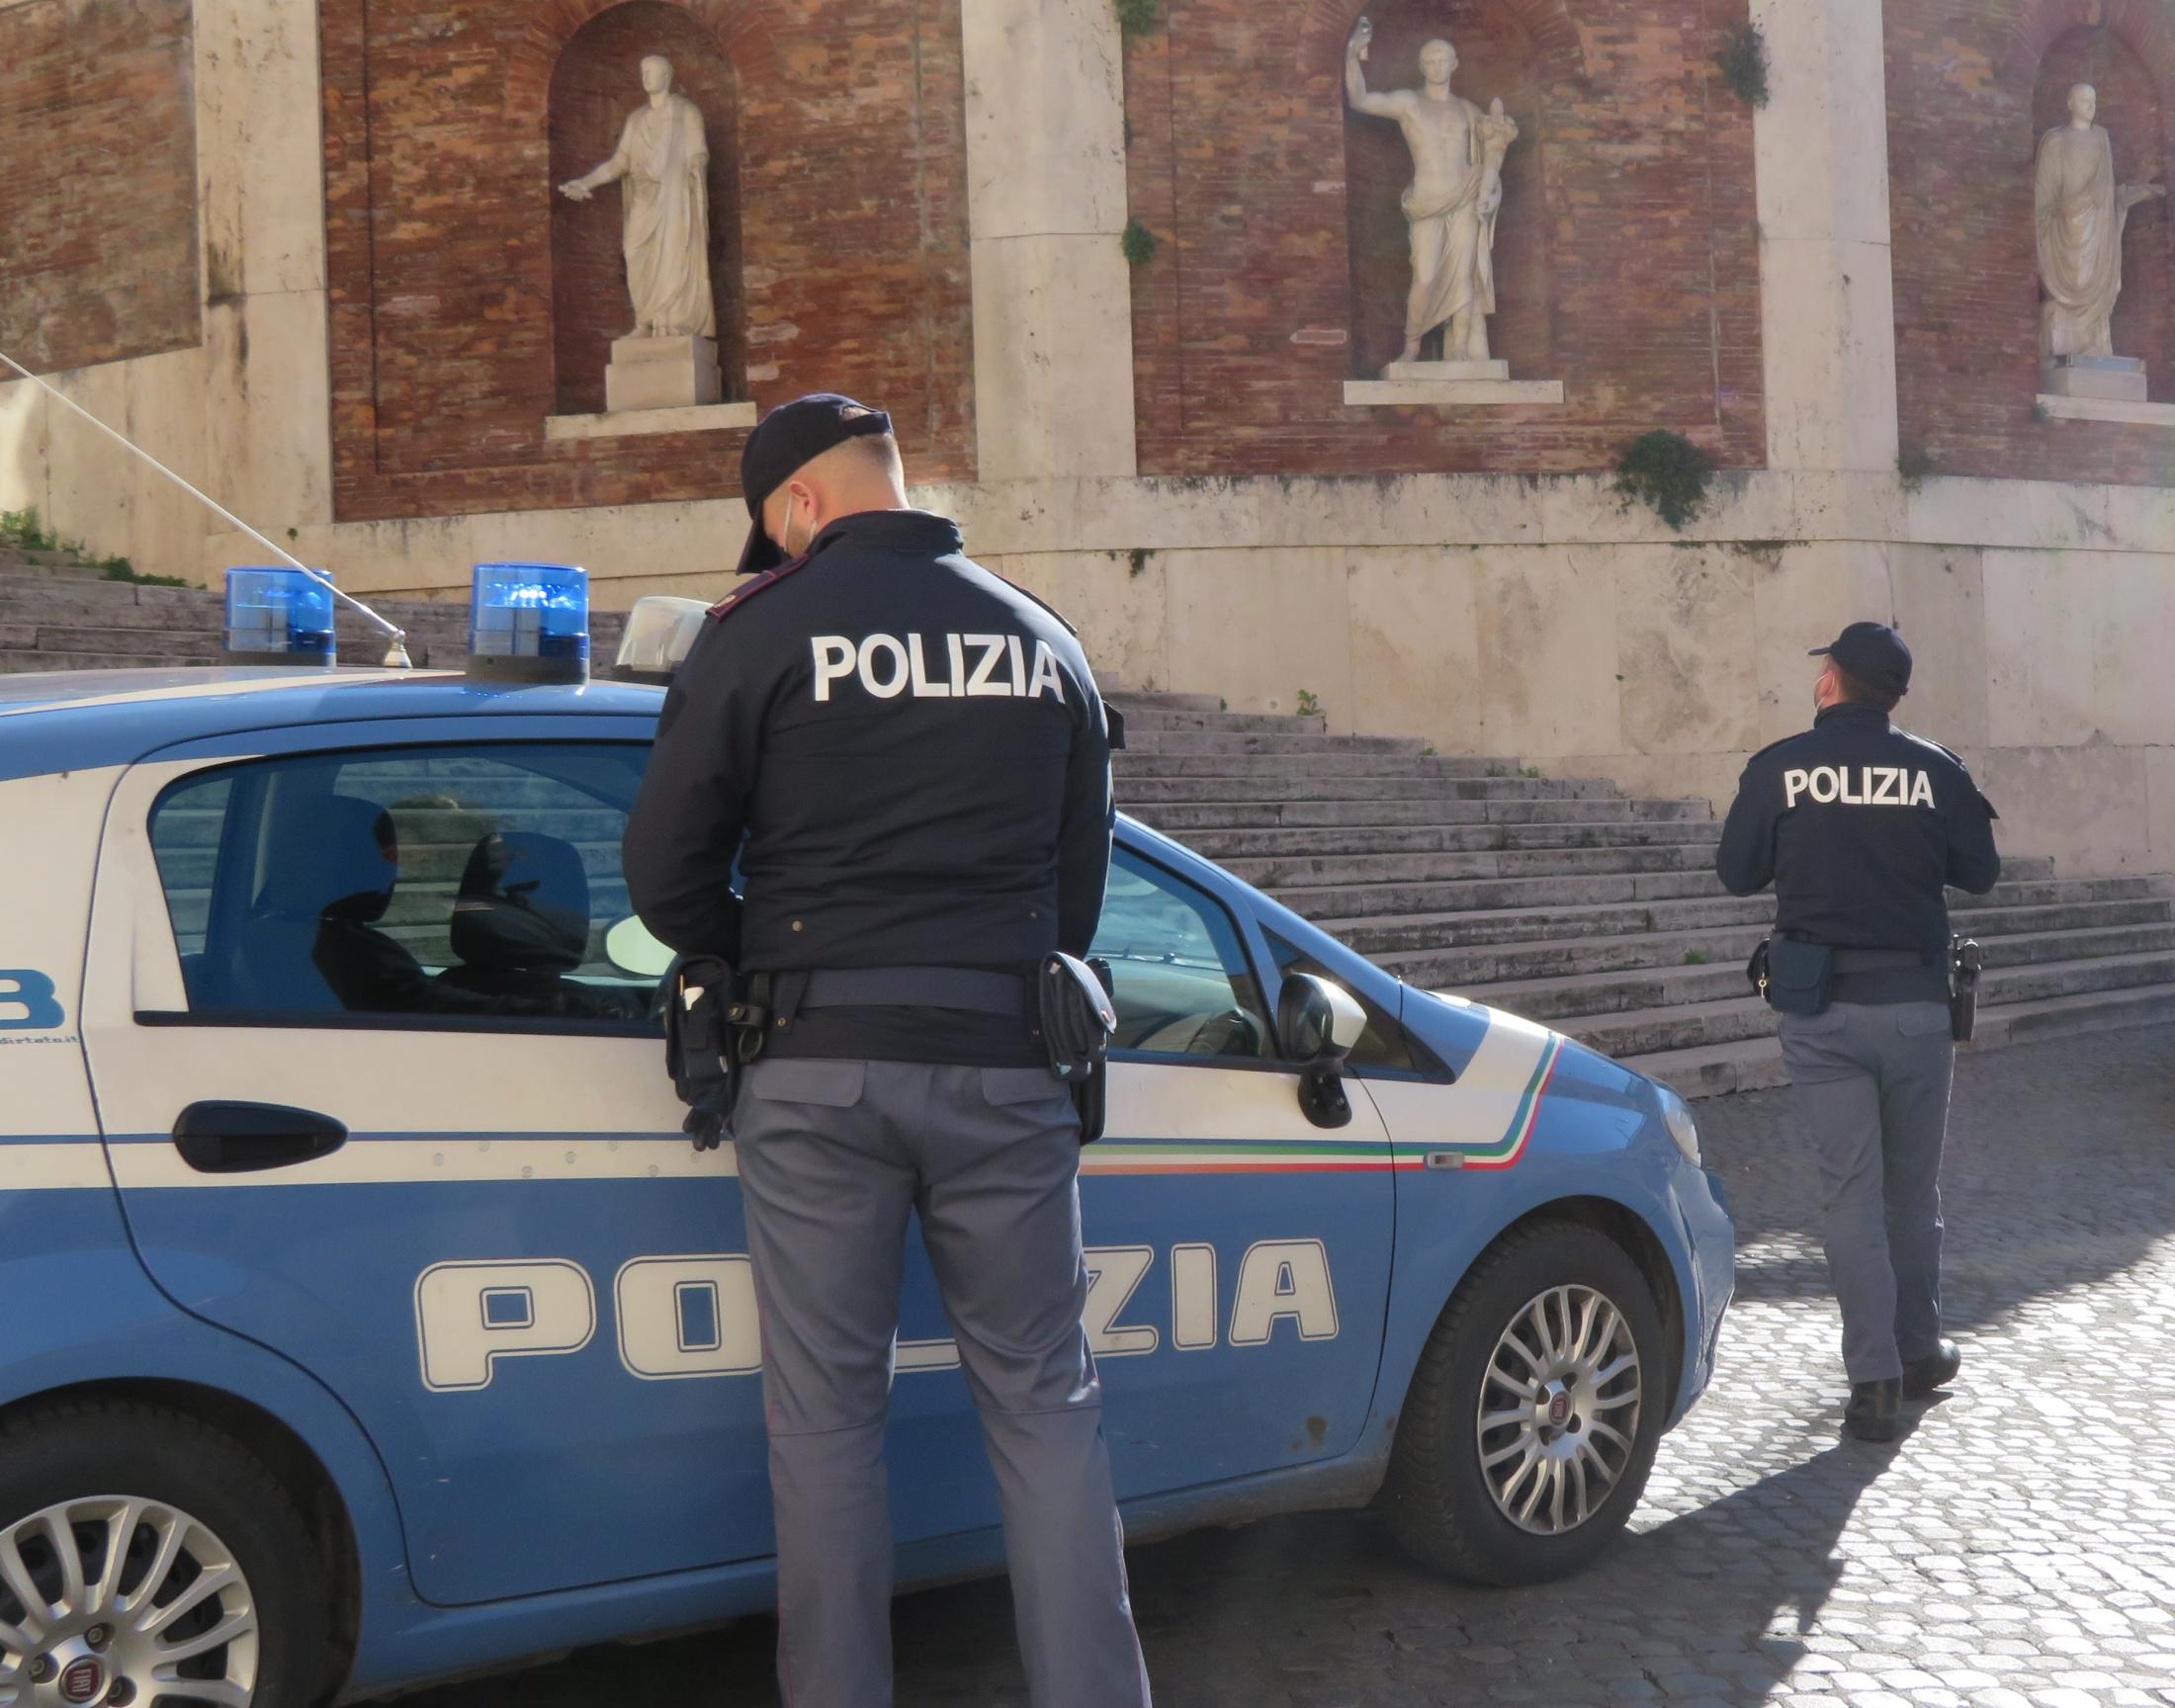 Italian security forces